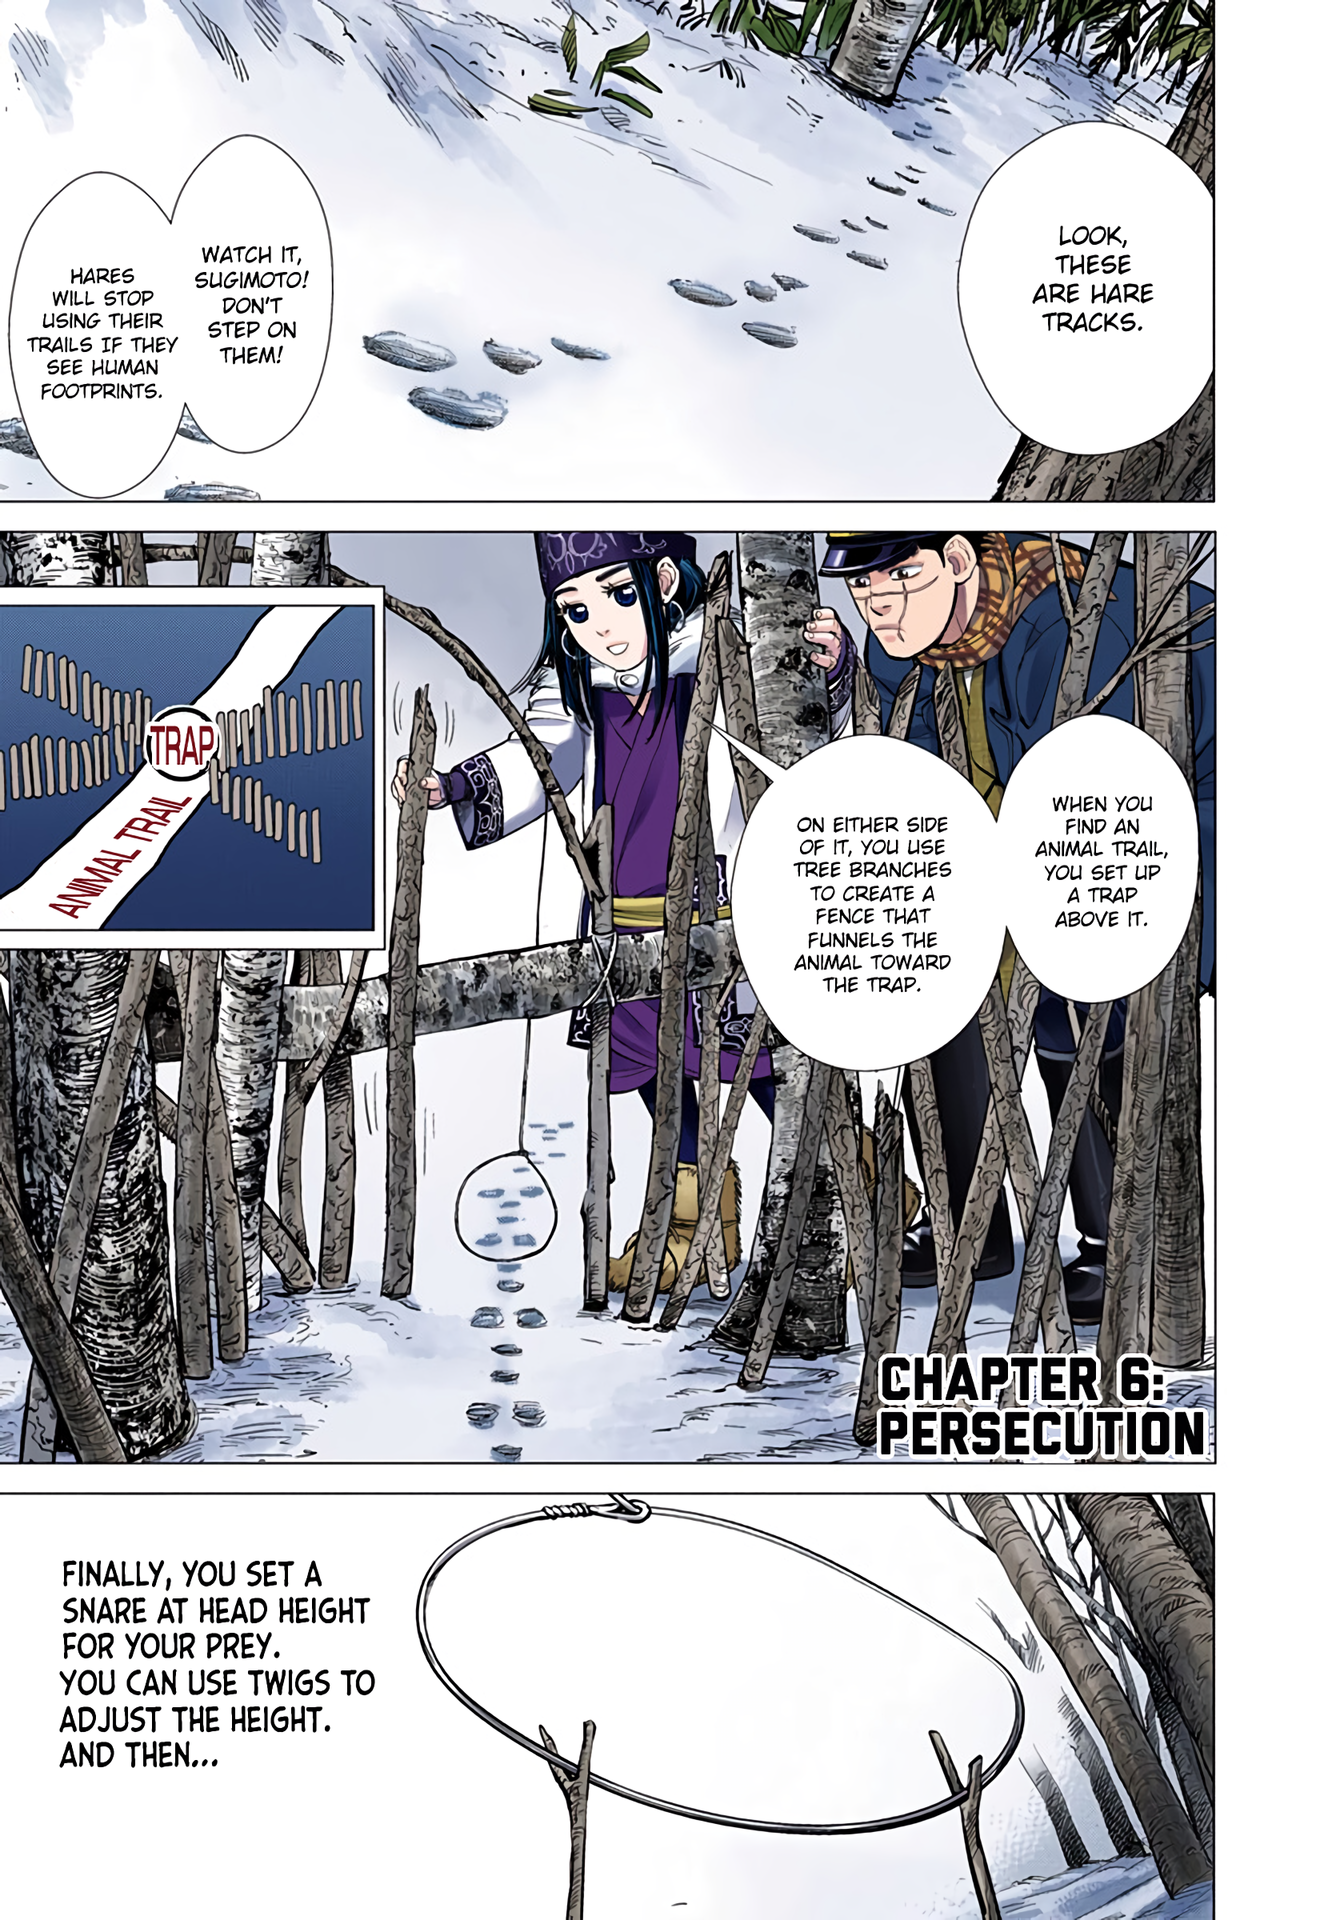 Golden Kamuy - Digital Colored Comics Vol.1 Chapter 6: Persecution - Picture 1